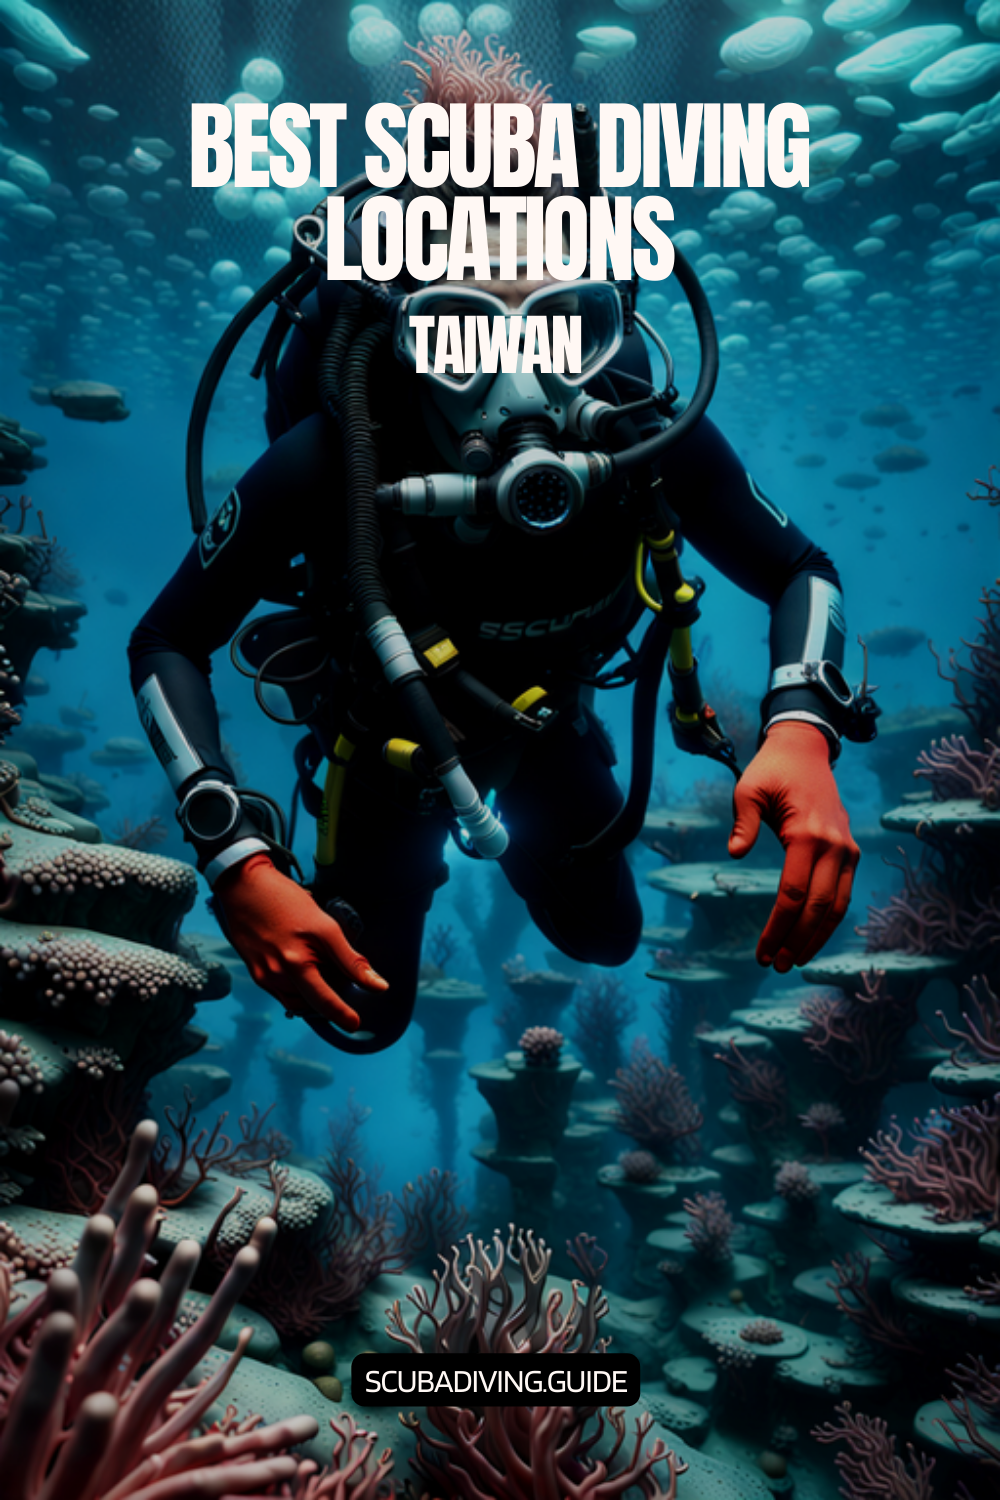 Scuba Diving Locations in Taiwan